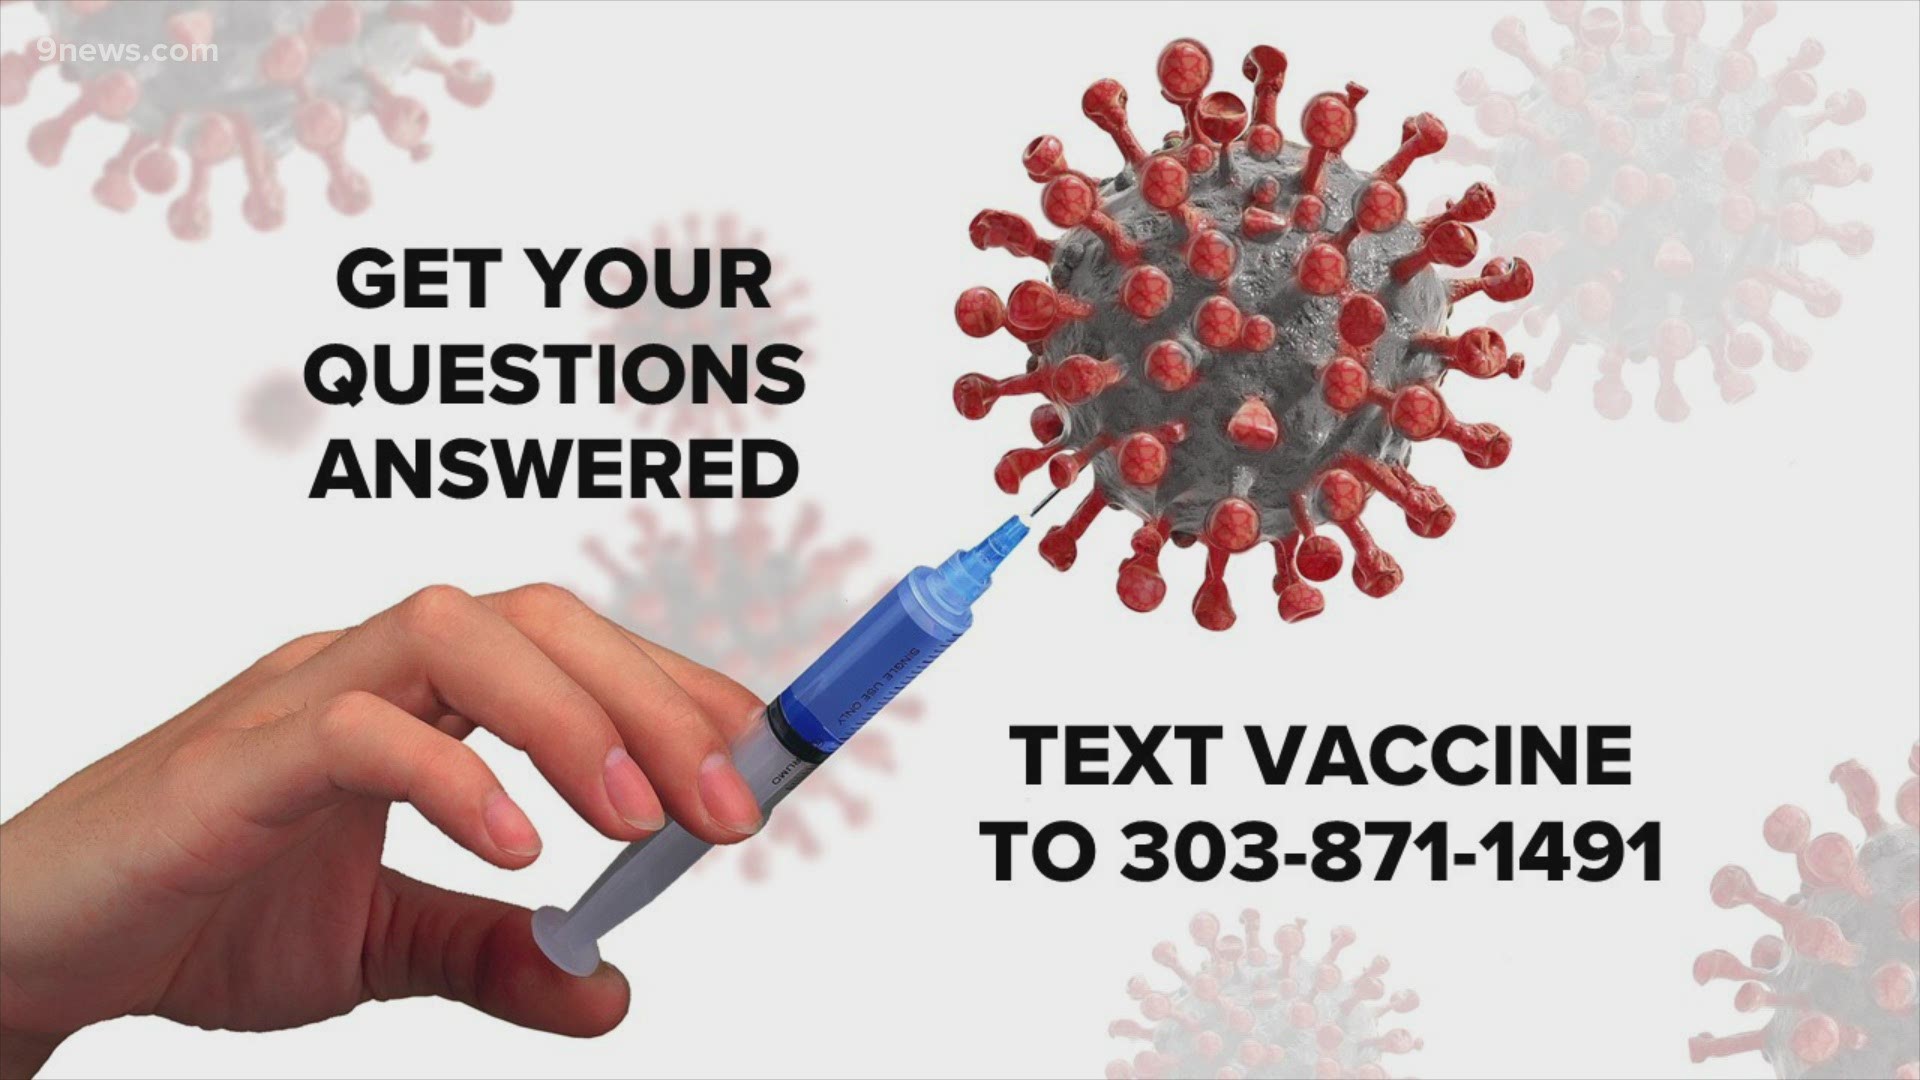 9NEWS Health expert Dr. Payal Kohli answers questions about the COVID-19 vaccine.